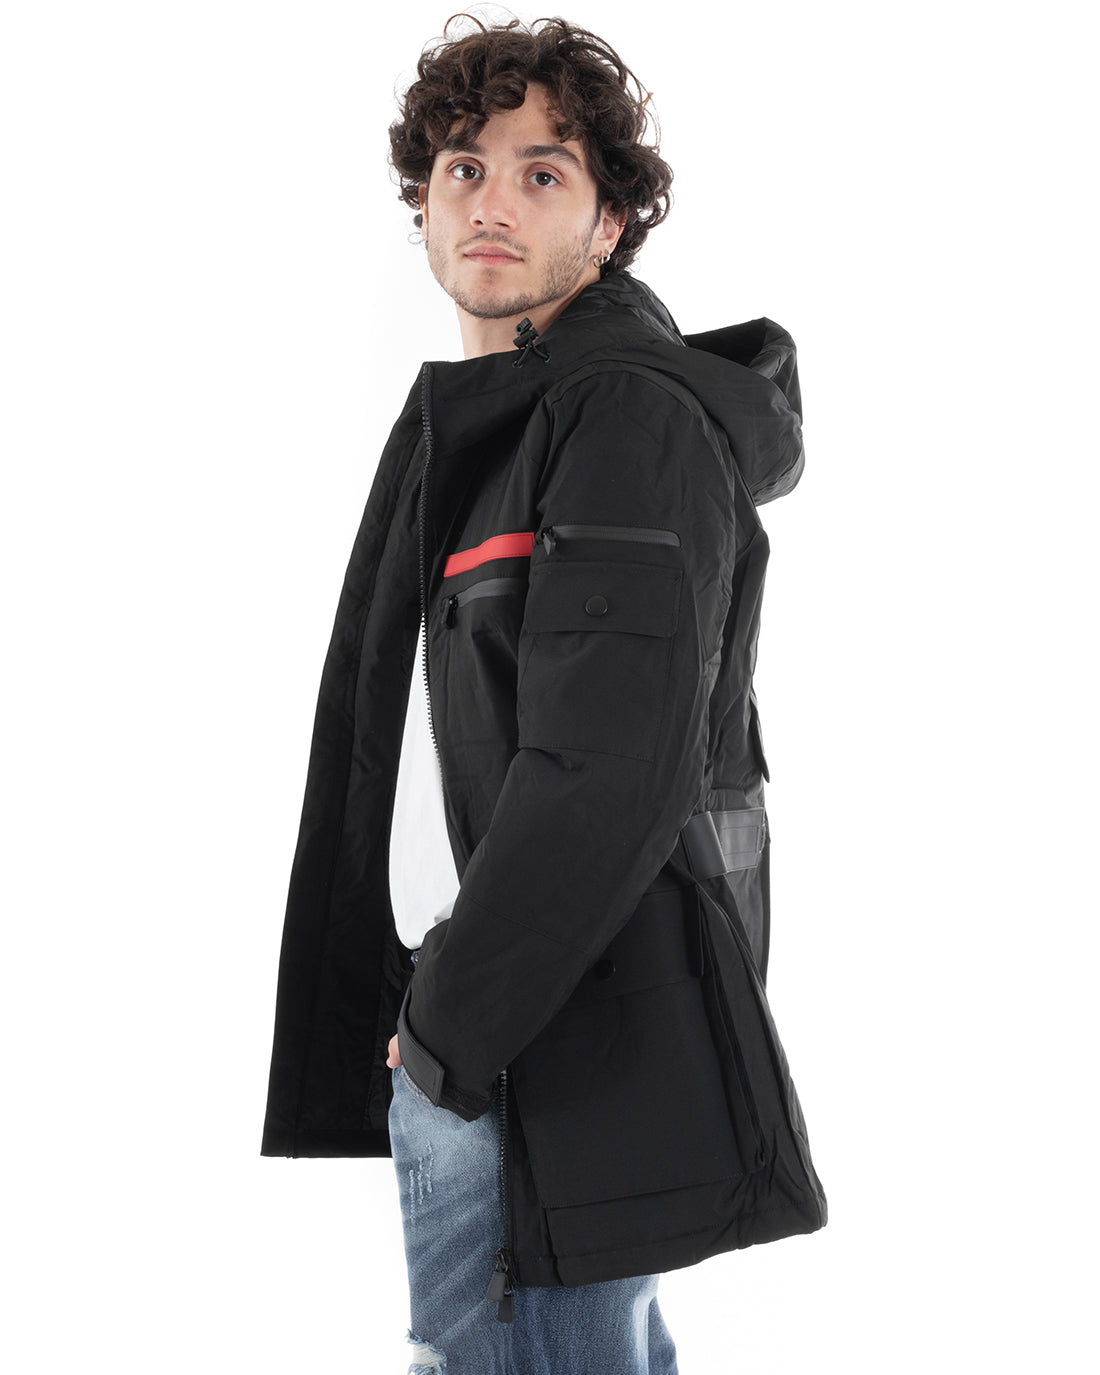 Men's Bomber Jacket in Solid Color Technical Fabric Black GIOSAL-G3001A